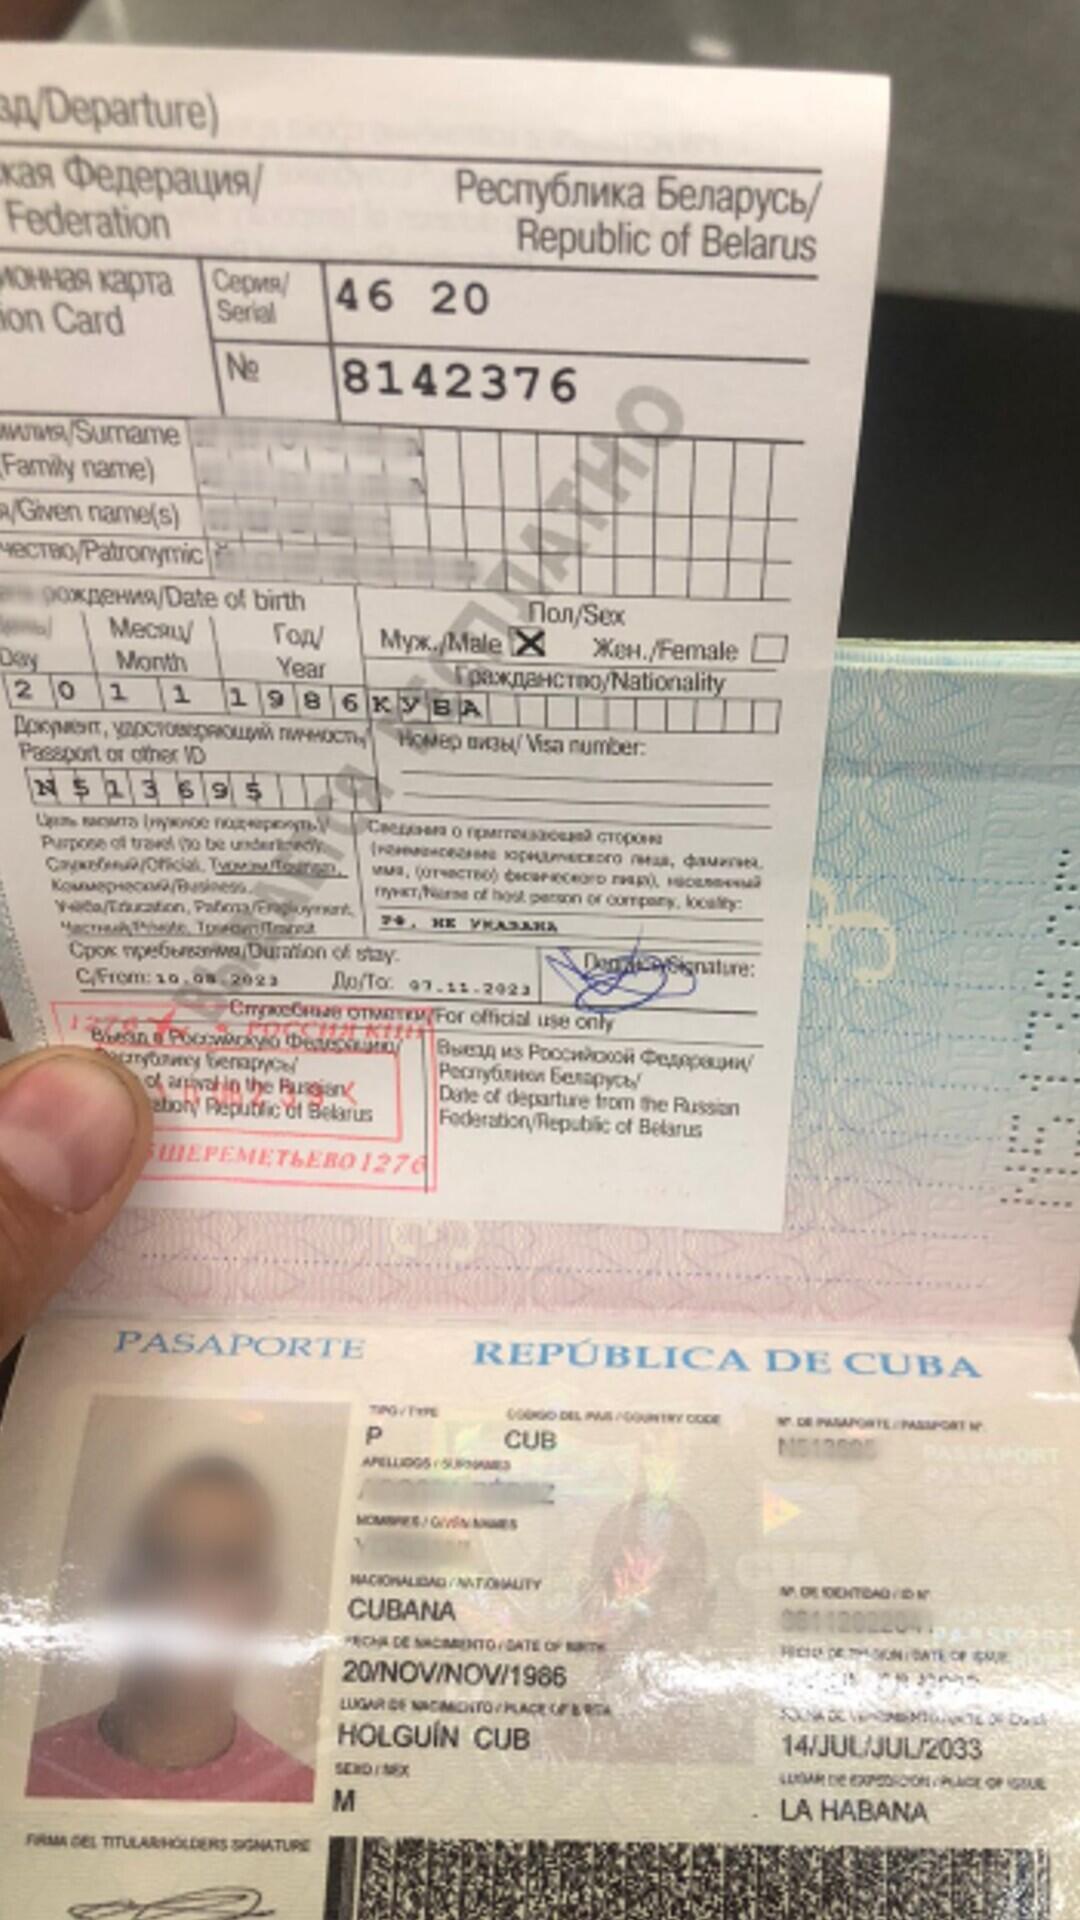 Passport and document attesting to the arrival in Russia of one of the Cubans identified by the pro-Ukrainian hackers.